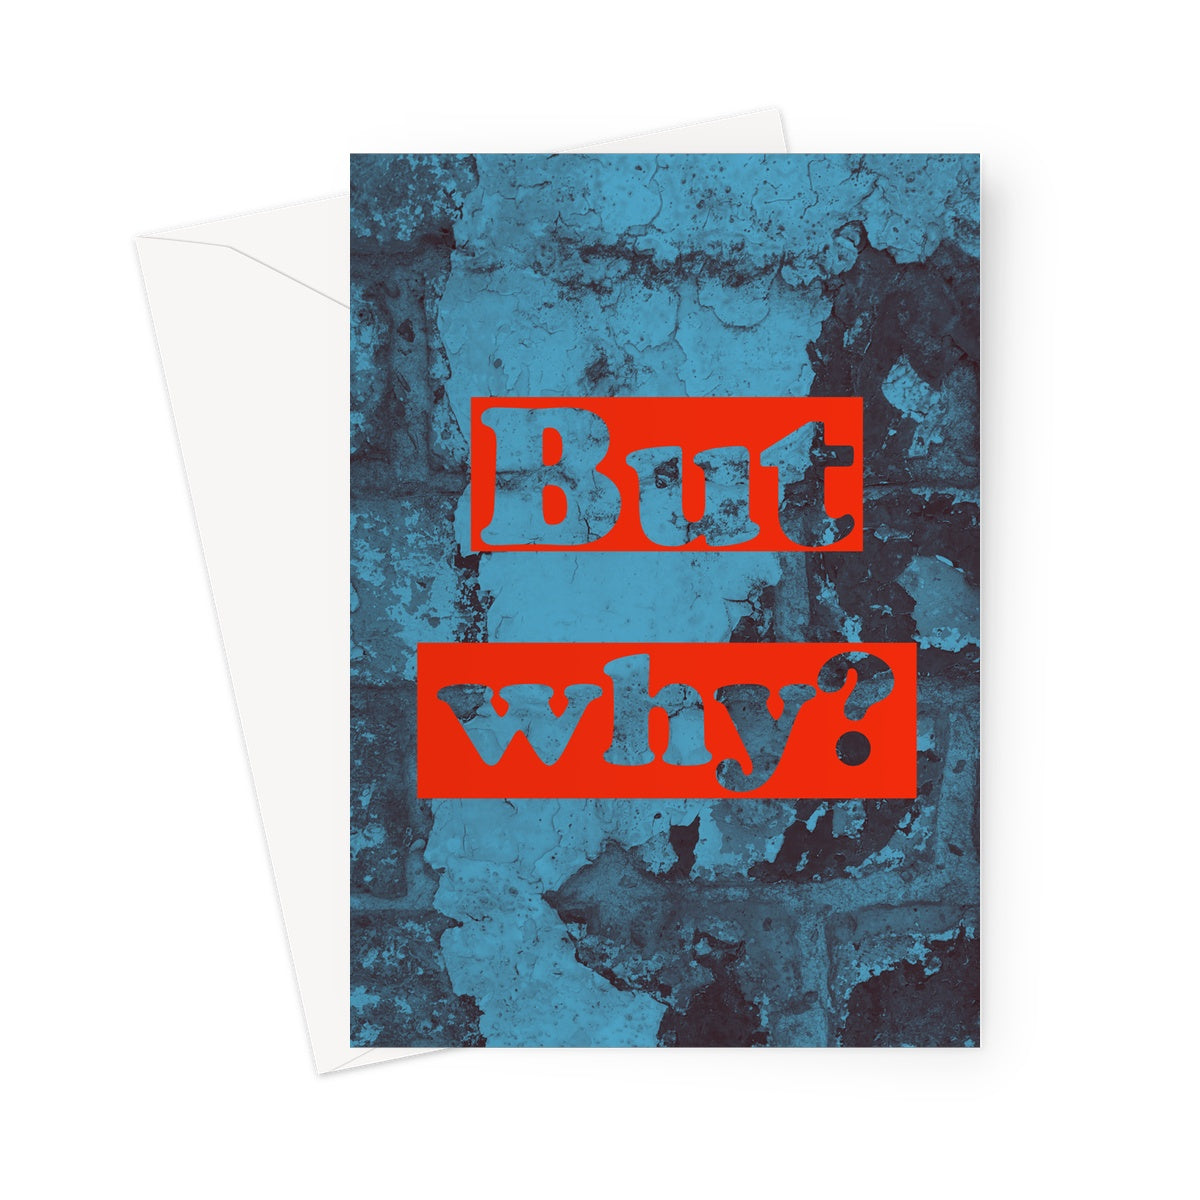 The question "But why?" surrounded in blocks of red overlays a blue-washed image of an old wall in this greeting card